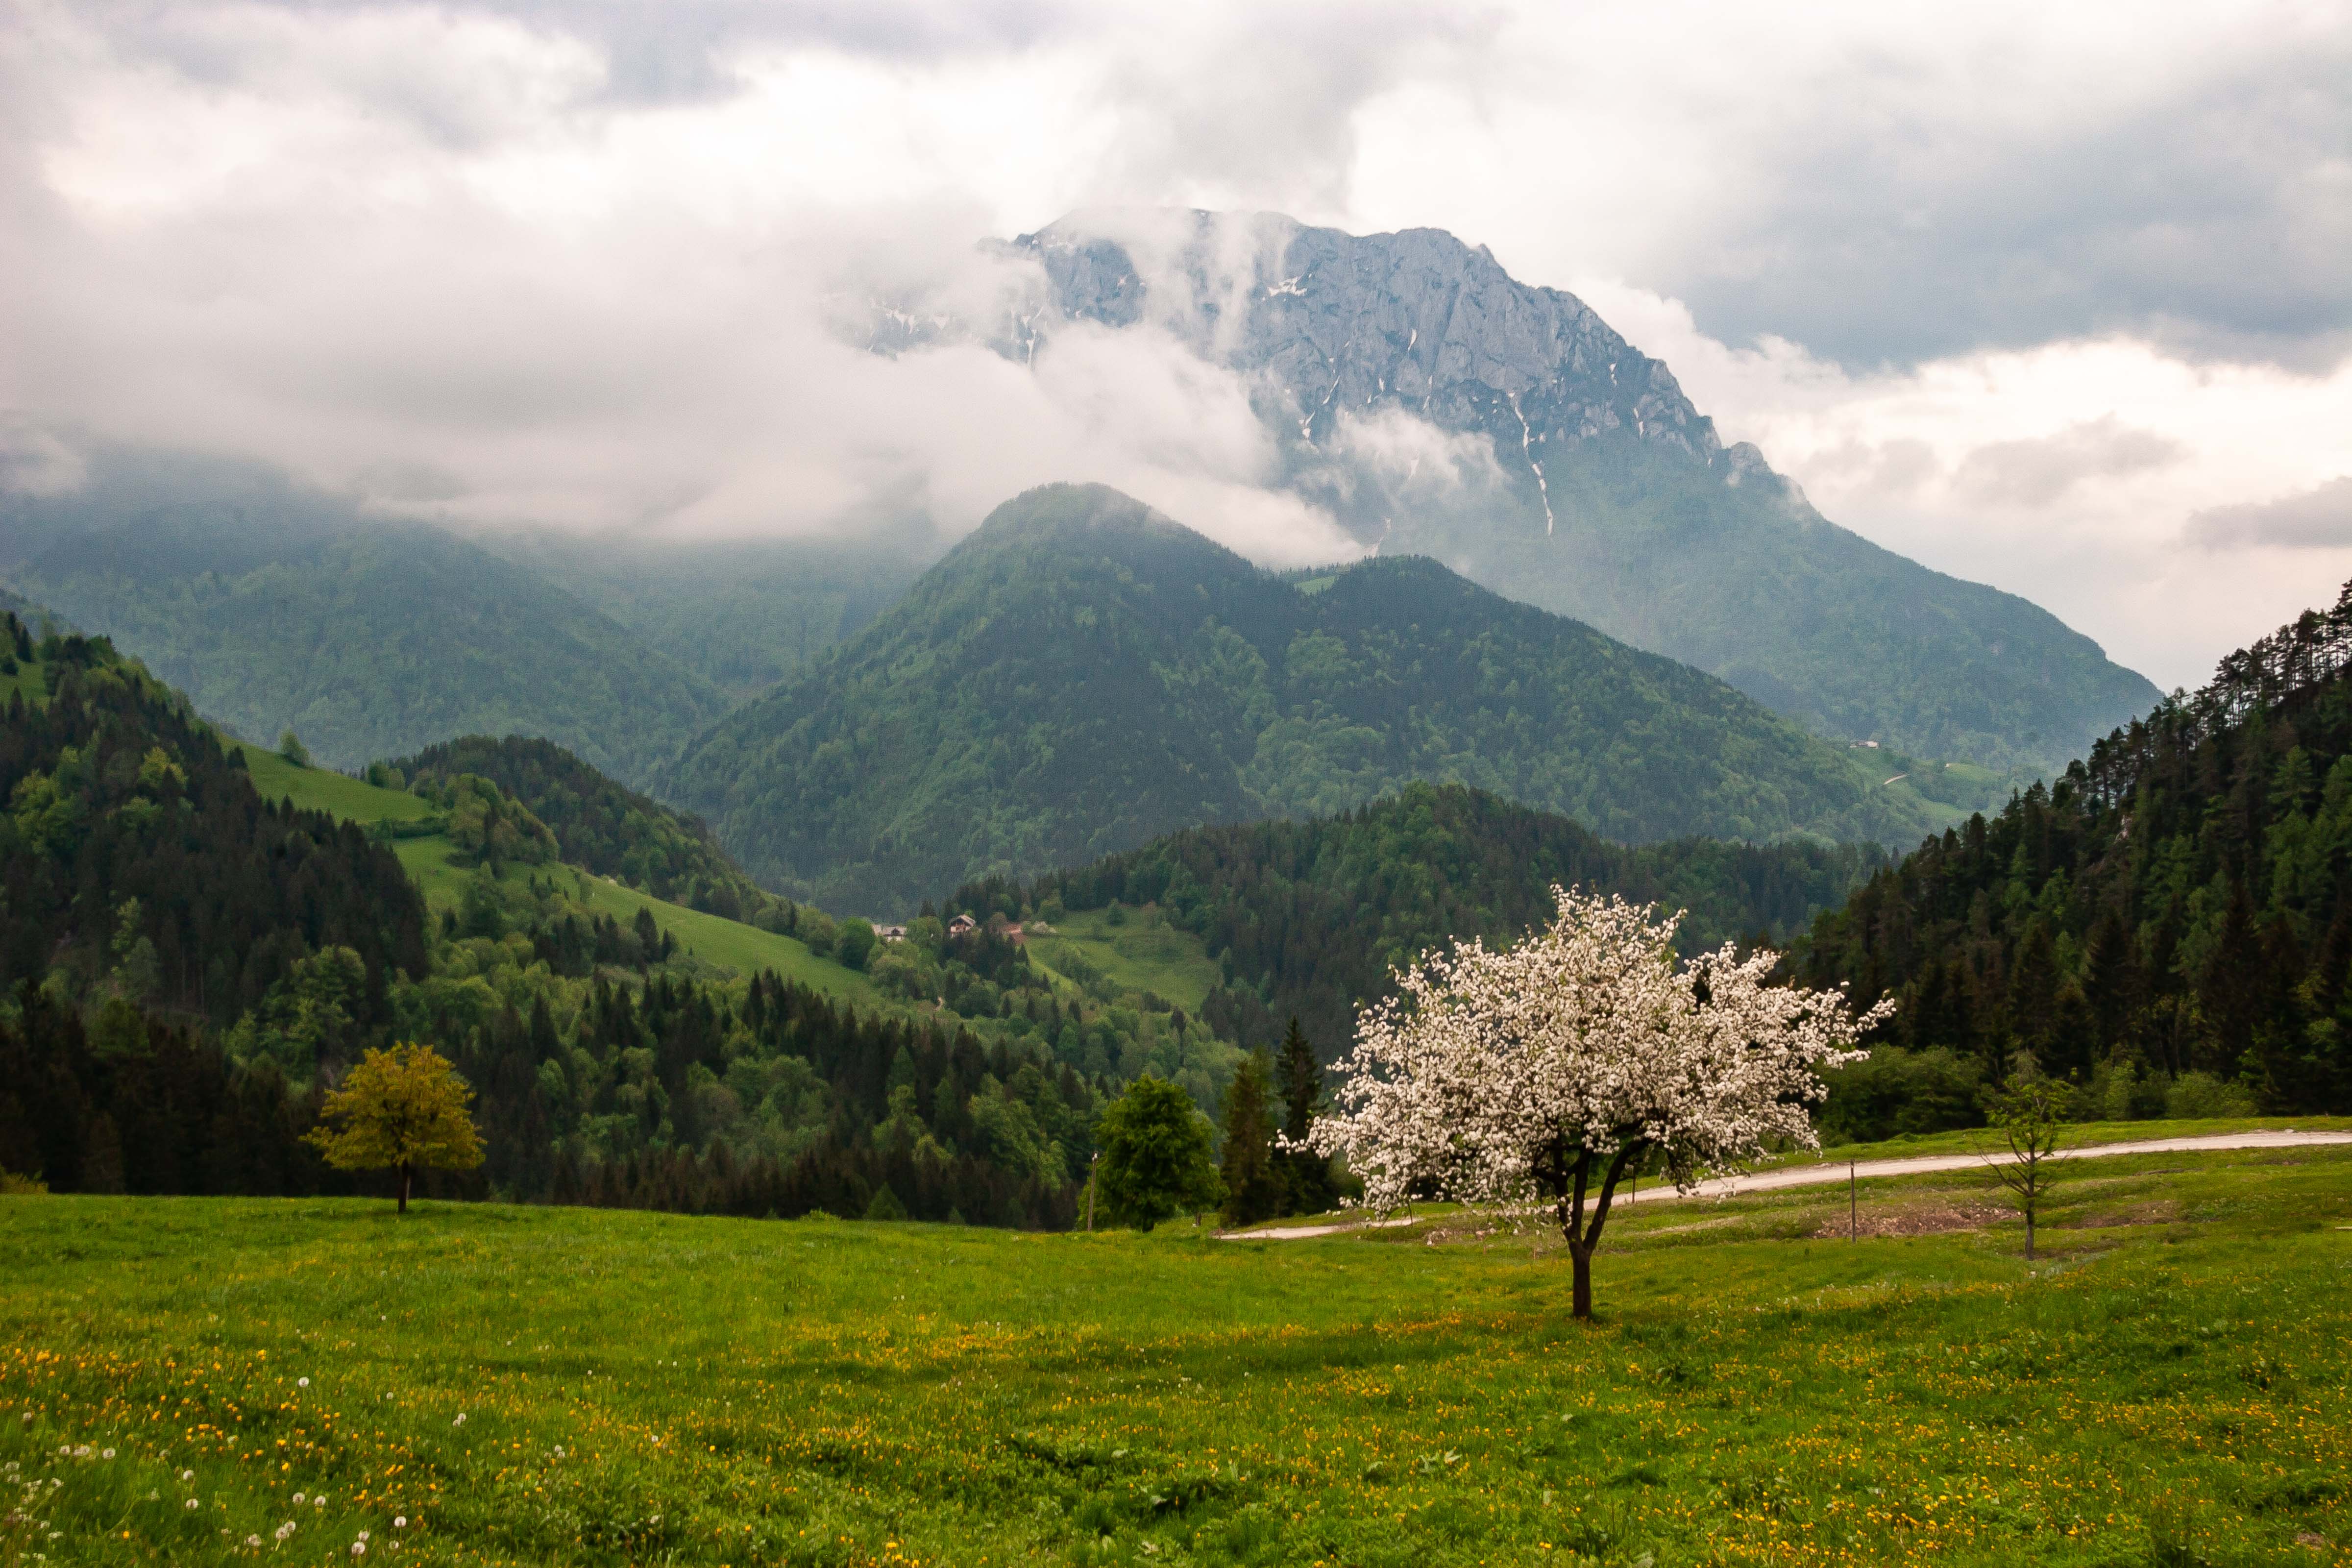 Slovenia, Solcava Prov, Blossoming Tree And Mountain, 2006, IMG 8418